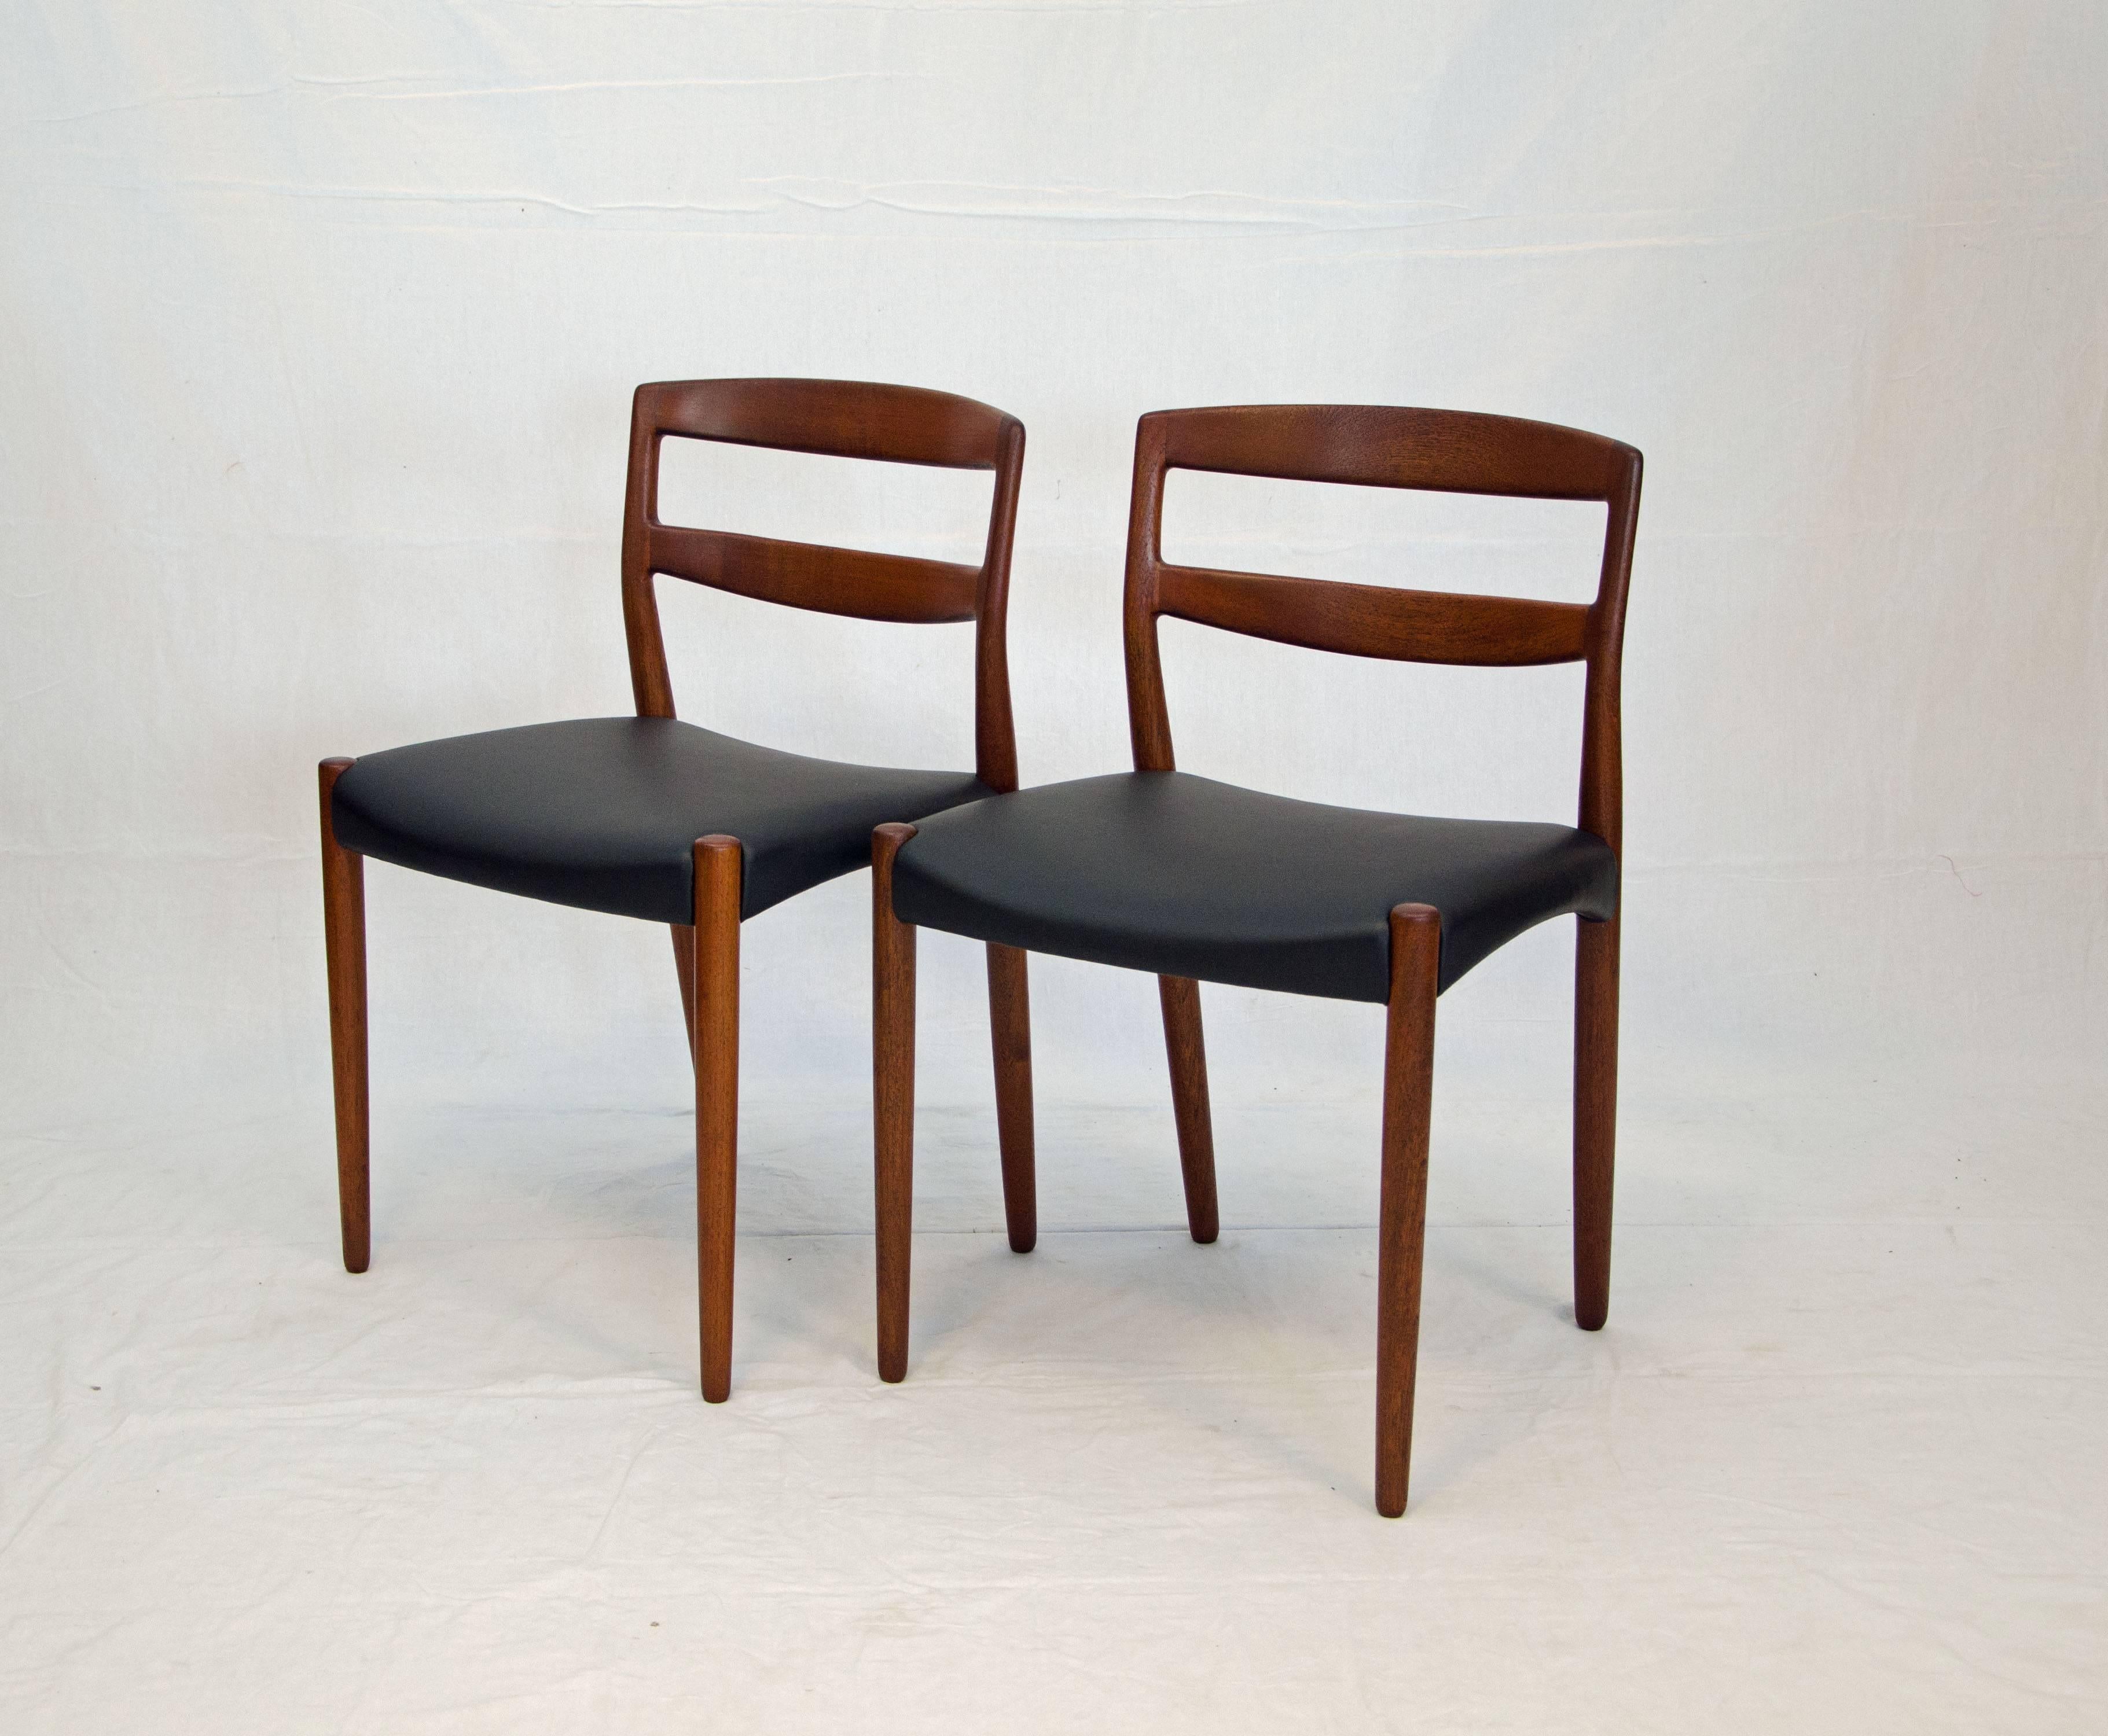 This pair of chairs have a minimalist curved sculptural back. A beautiful chair by the renowned Danish cabinetmaker Willy Beck.